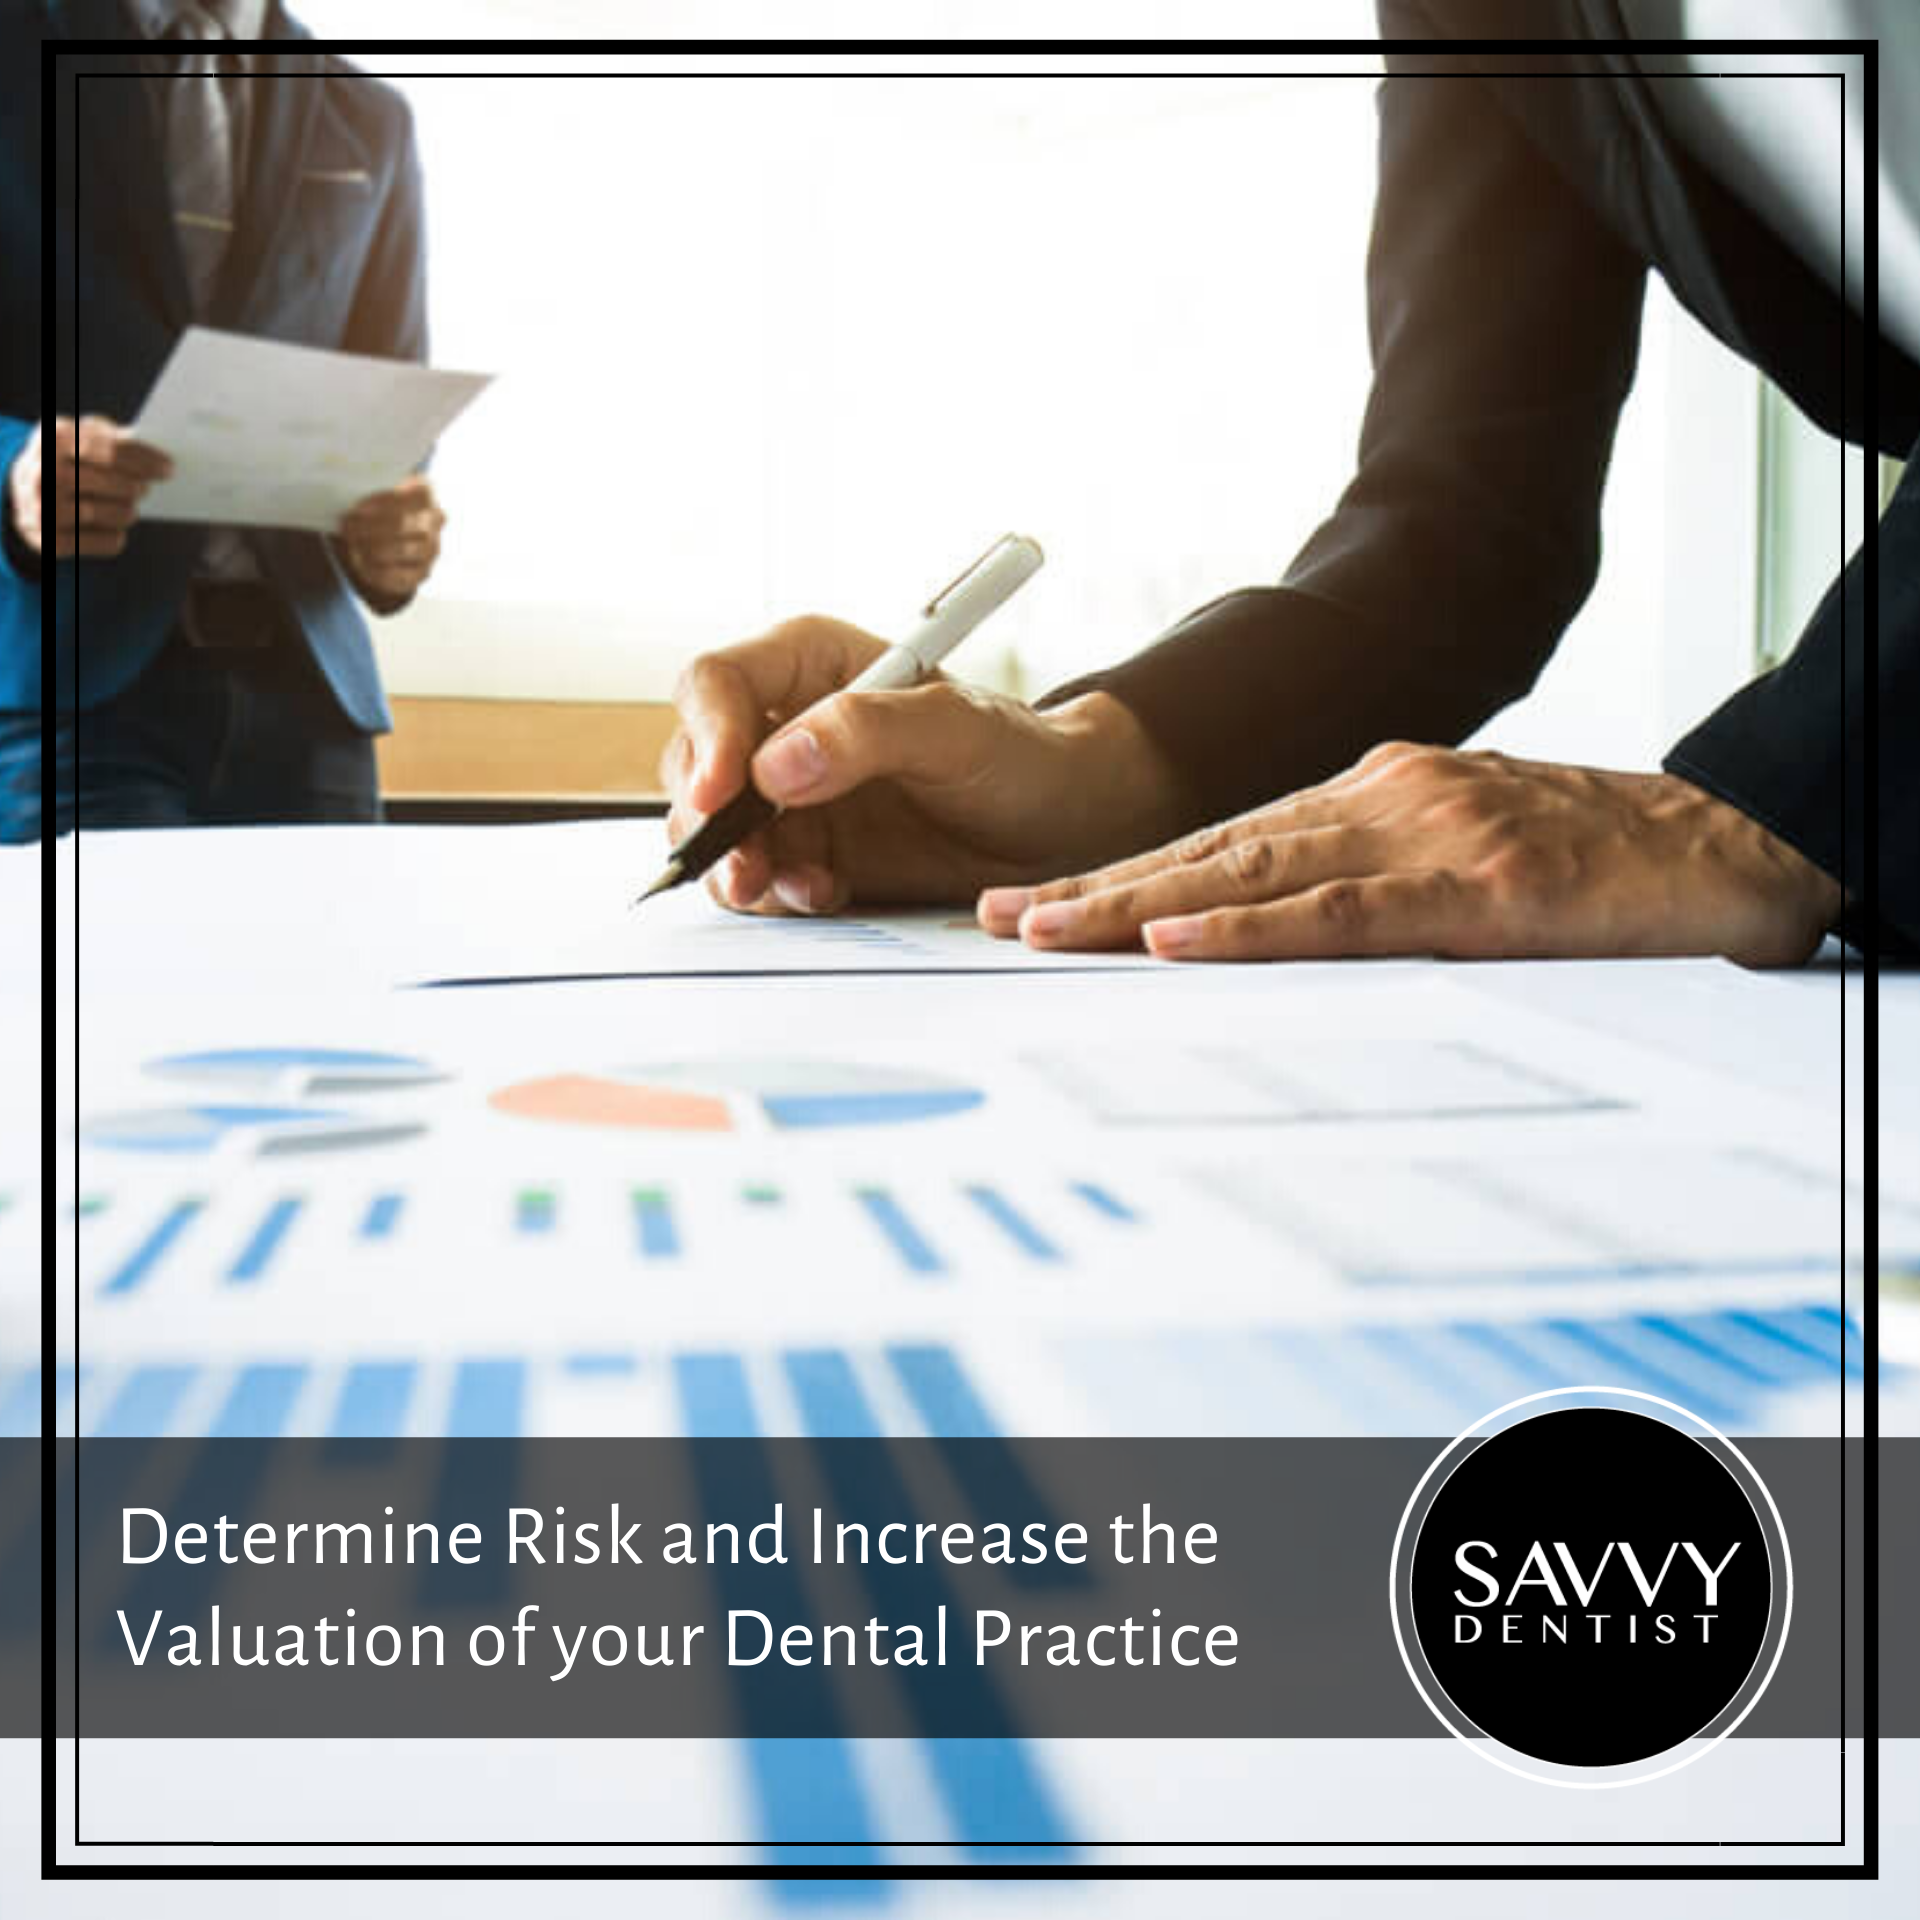 Determine Risk and Increase the Valuation of Your Dental Practice